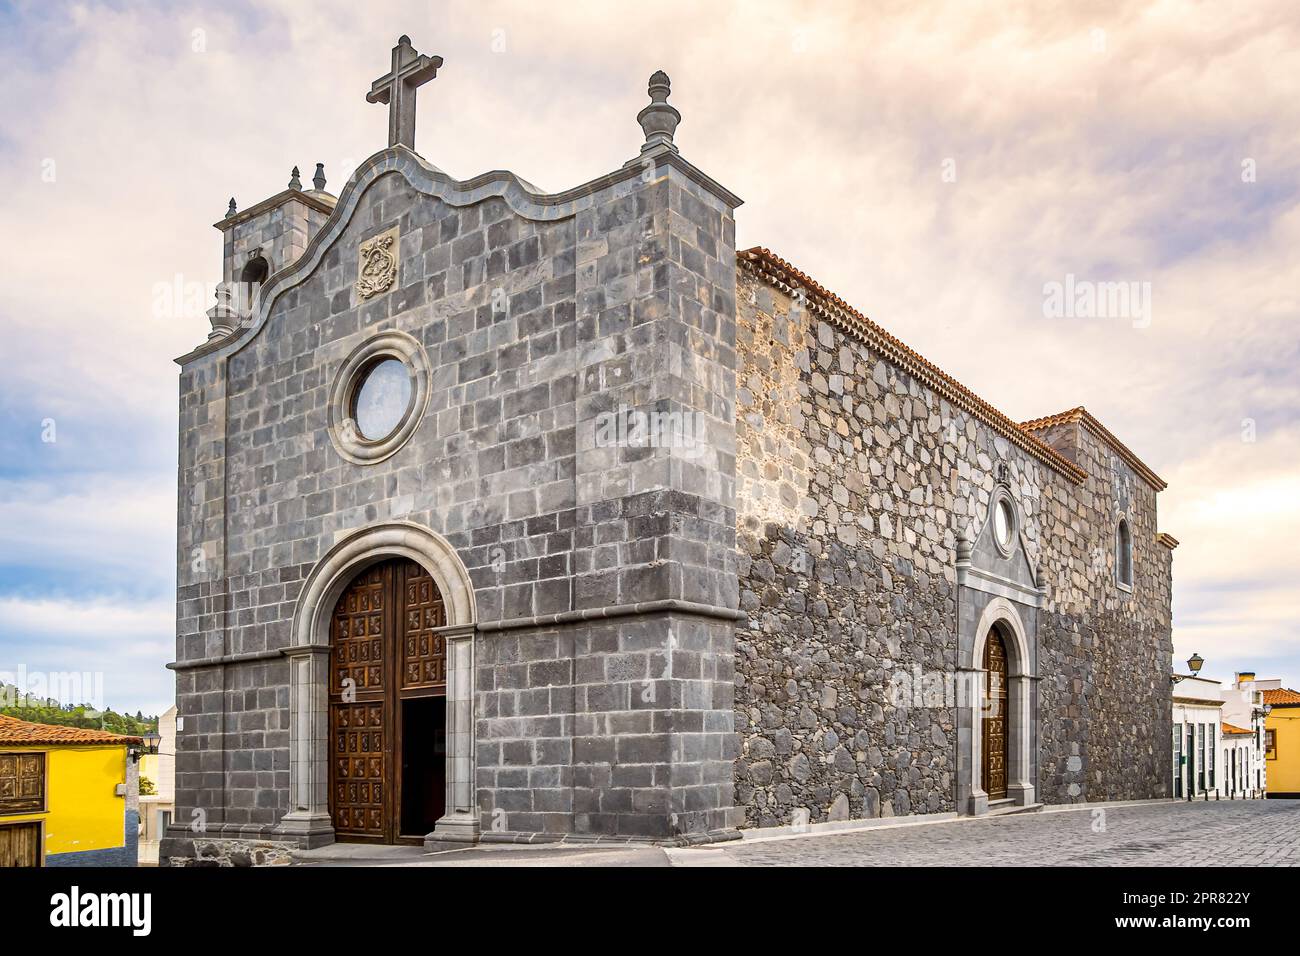 Facades of Santuario del Santo Hermano Pedro, a historical pilgrimage temple dedicated to the first saint of the Canary Islands. Stock Photo